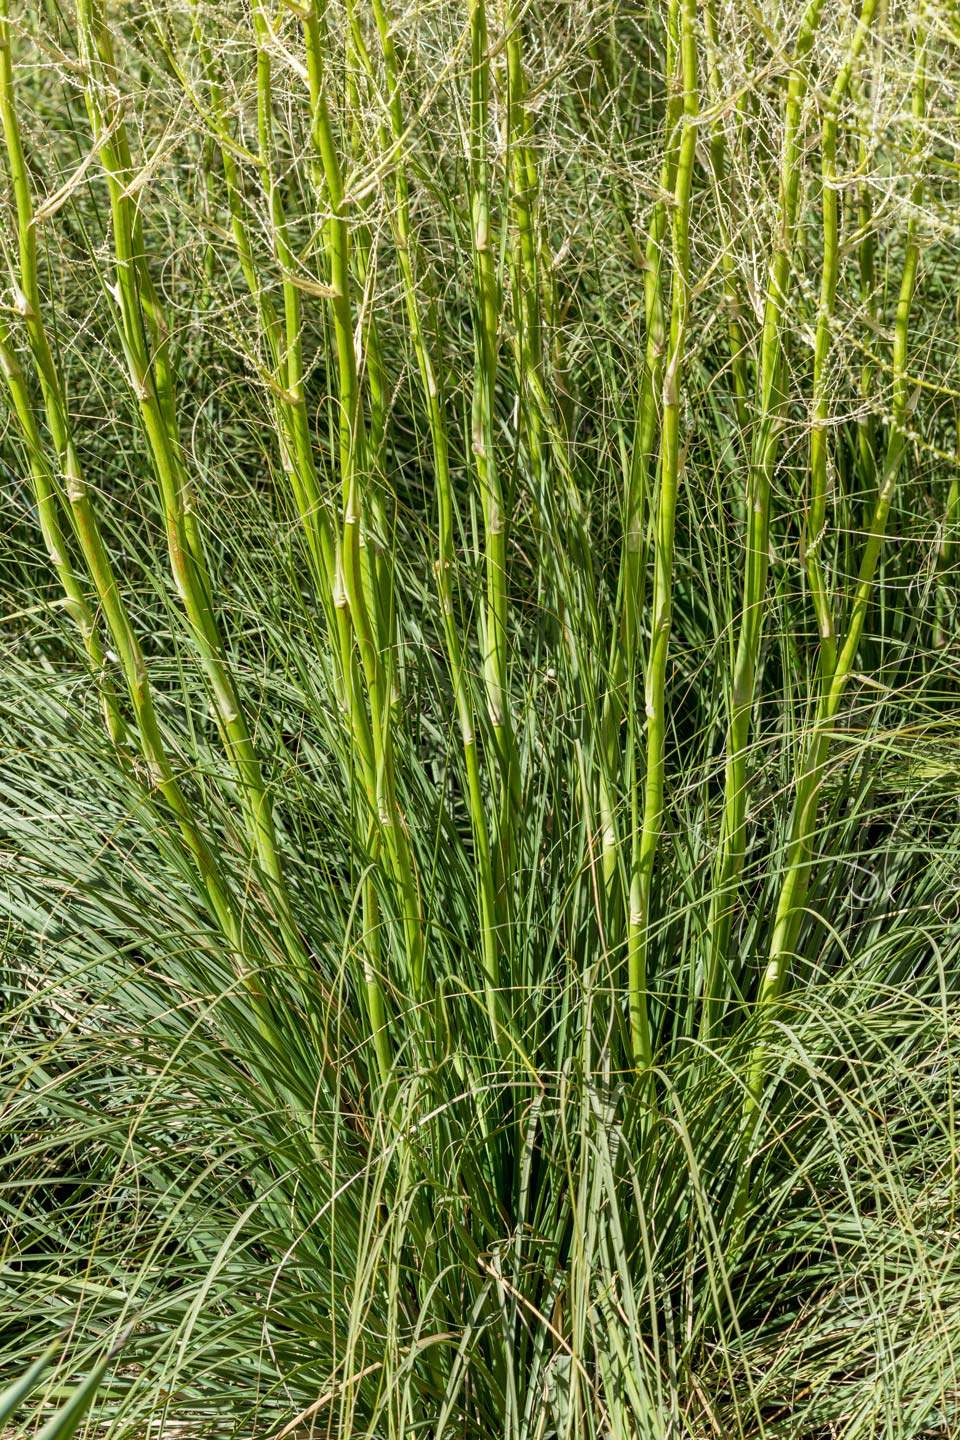 A close-up of the grassy leaves of Texas Bear Grass.